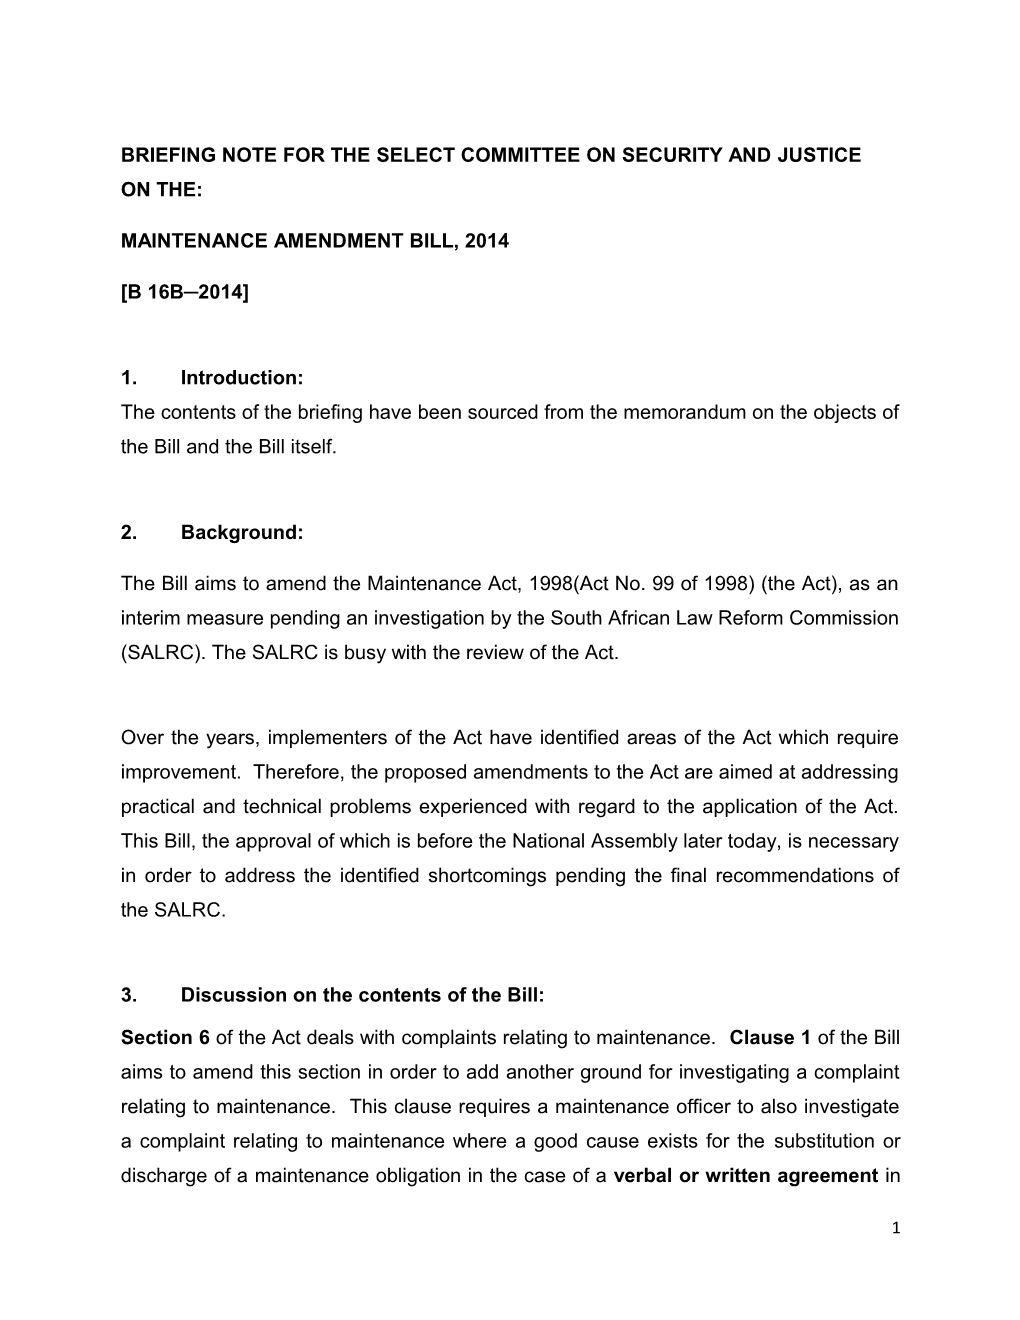 Briefing Note for the Select Committee on Security and Justice